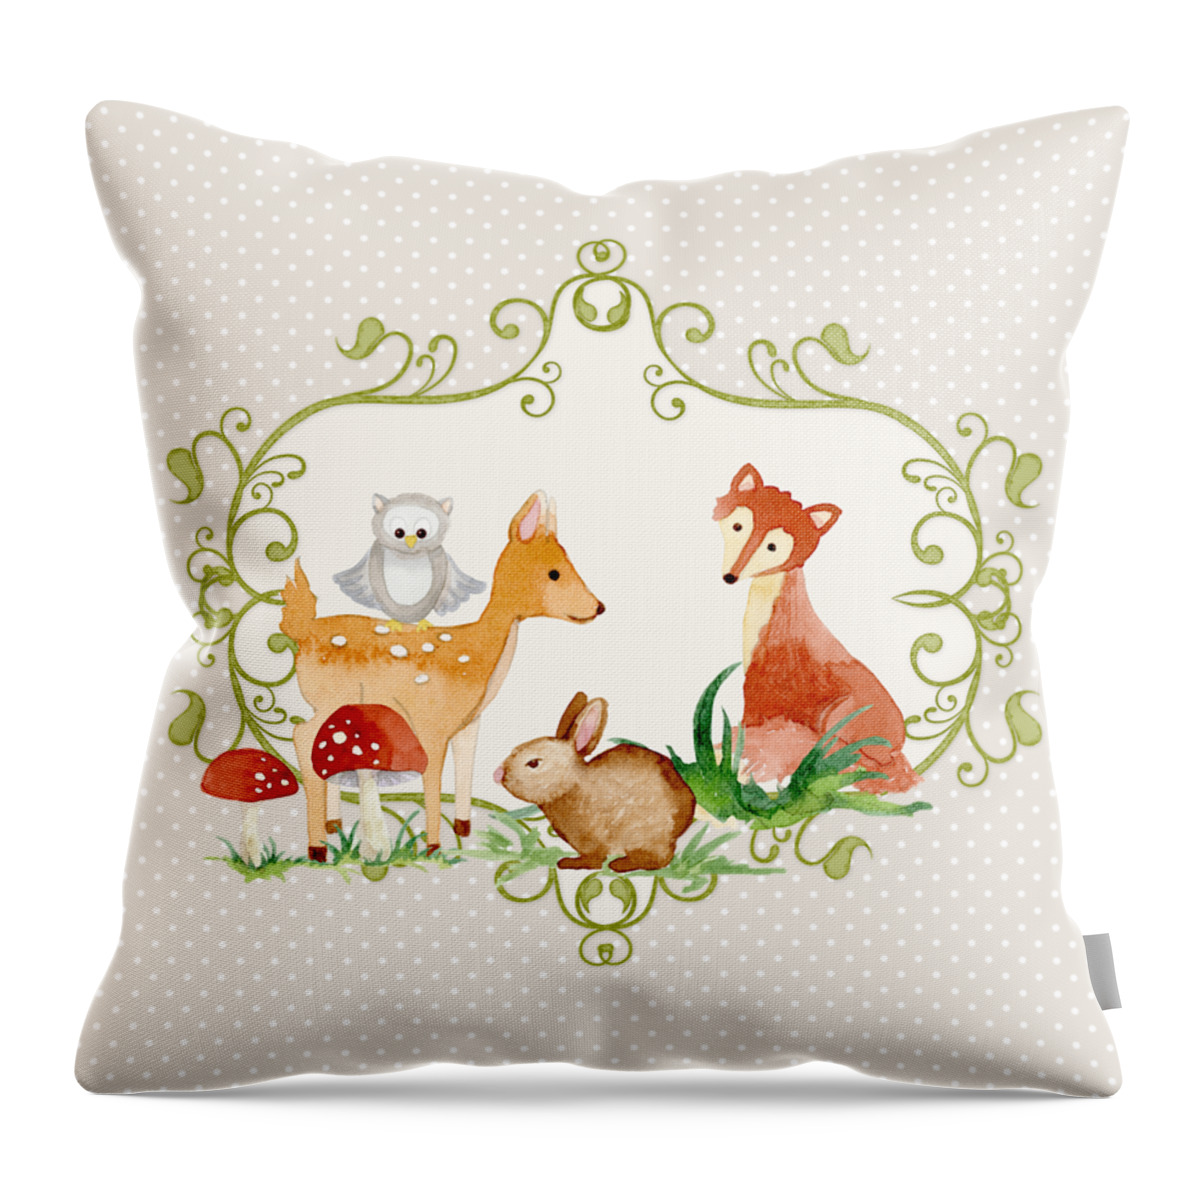 Grey Throw Pillow featuring the painting Woodland Fairytale - Grey Animals Deer Owl Fox Bunny n Mushrooms by Audrey Jeanne Roberts